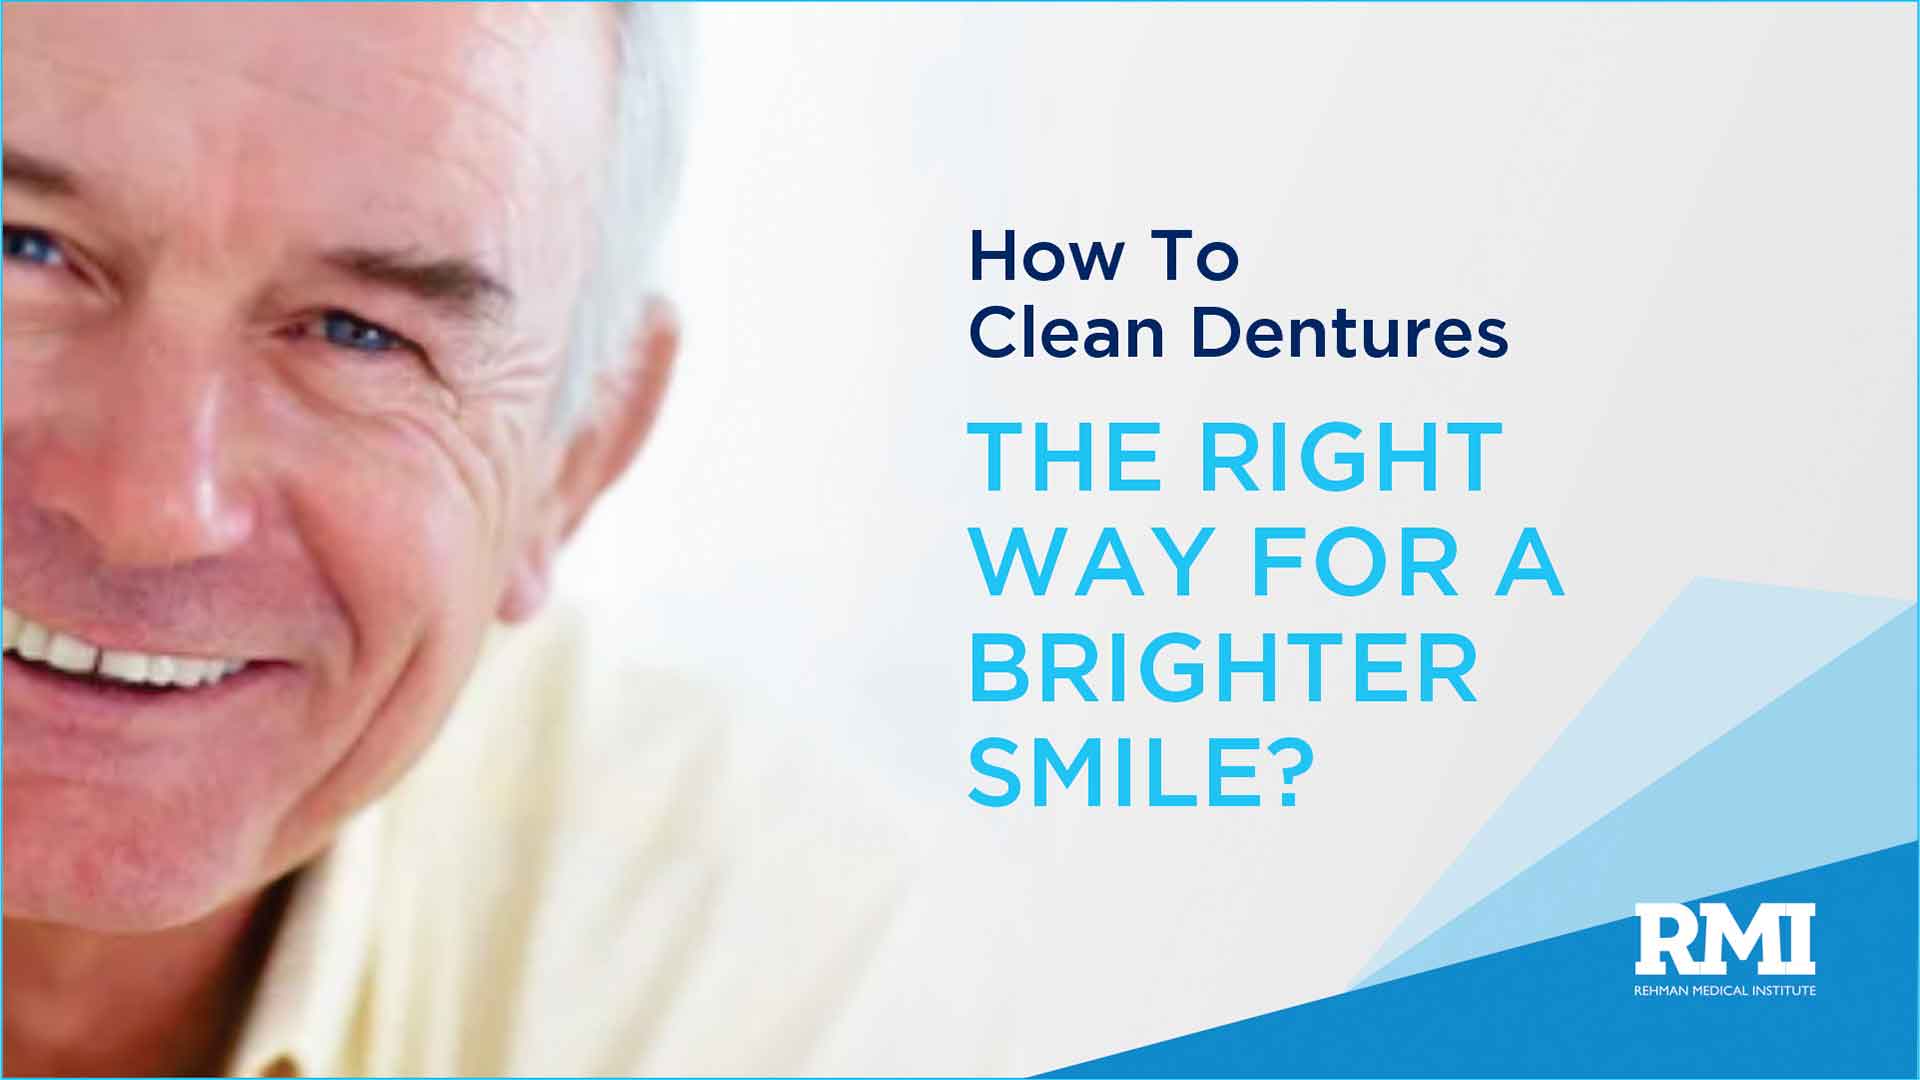 How to Clean Dentures the Right Way for a Brighter Smile?